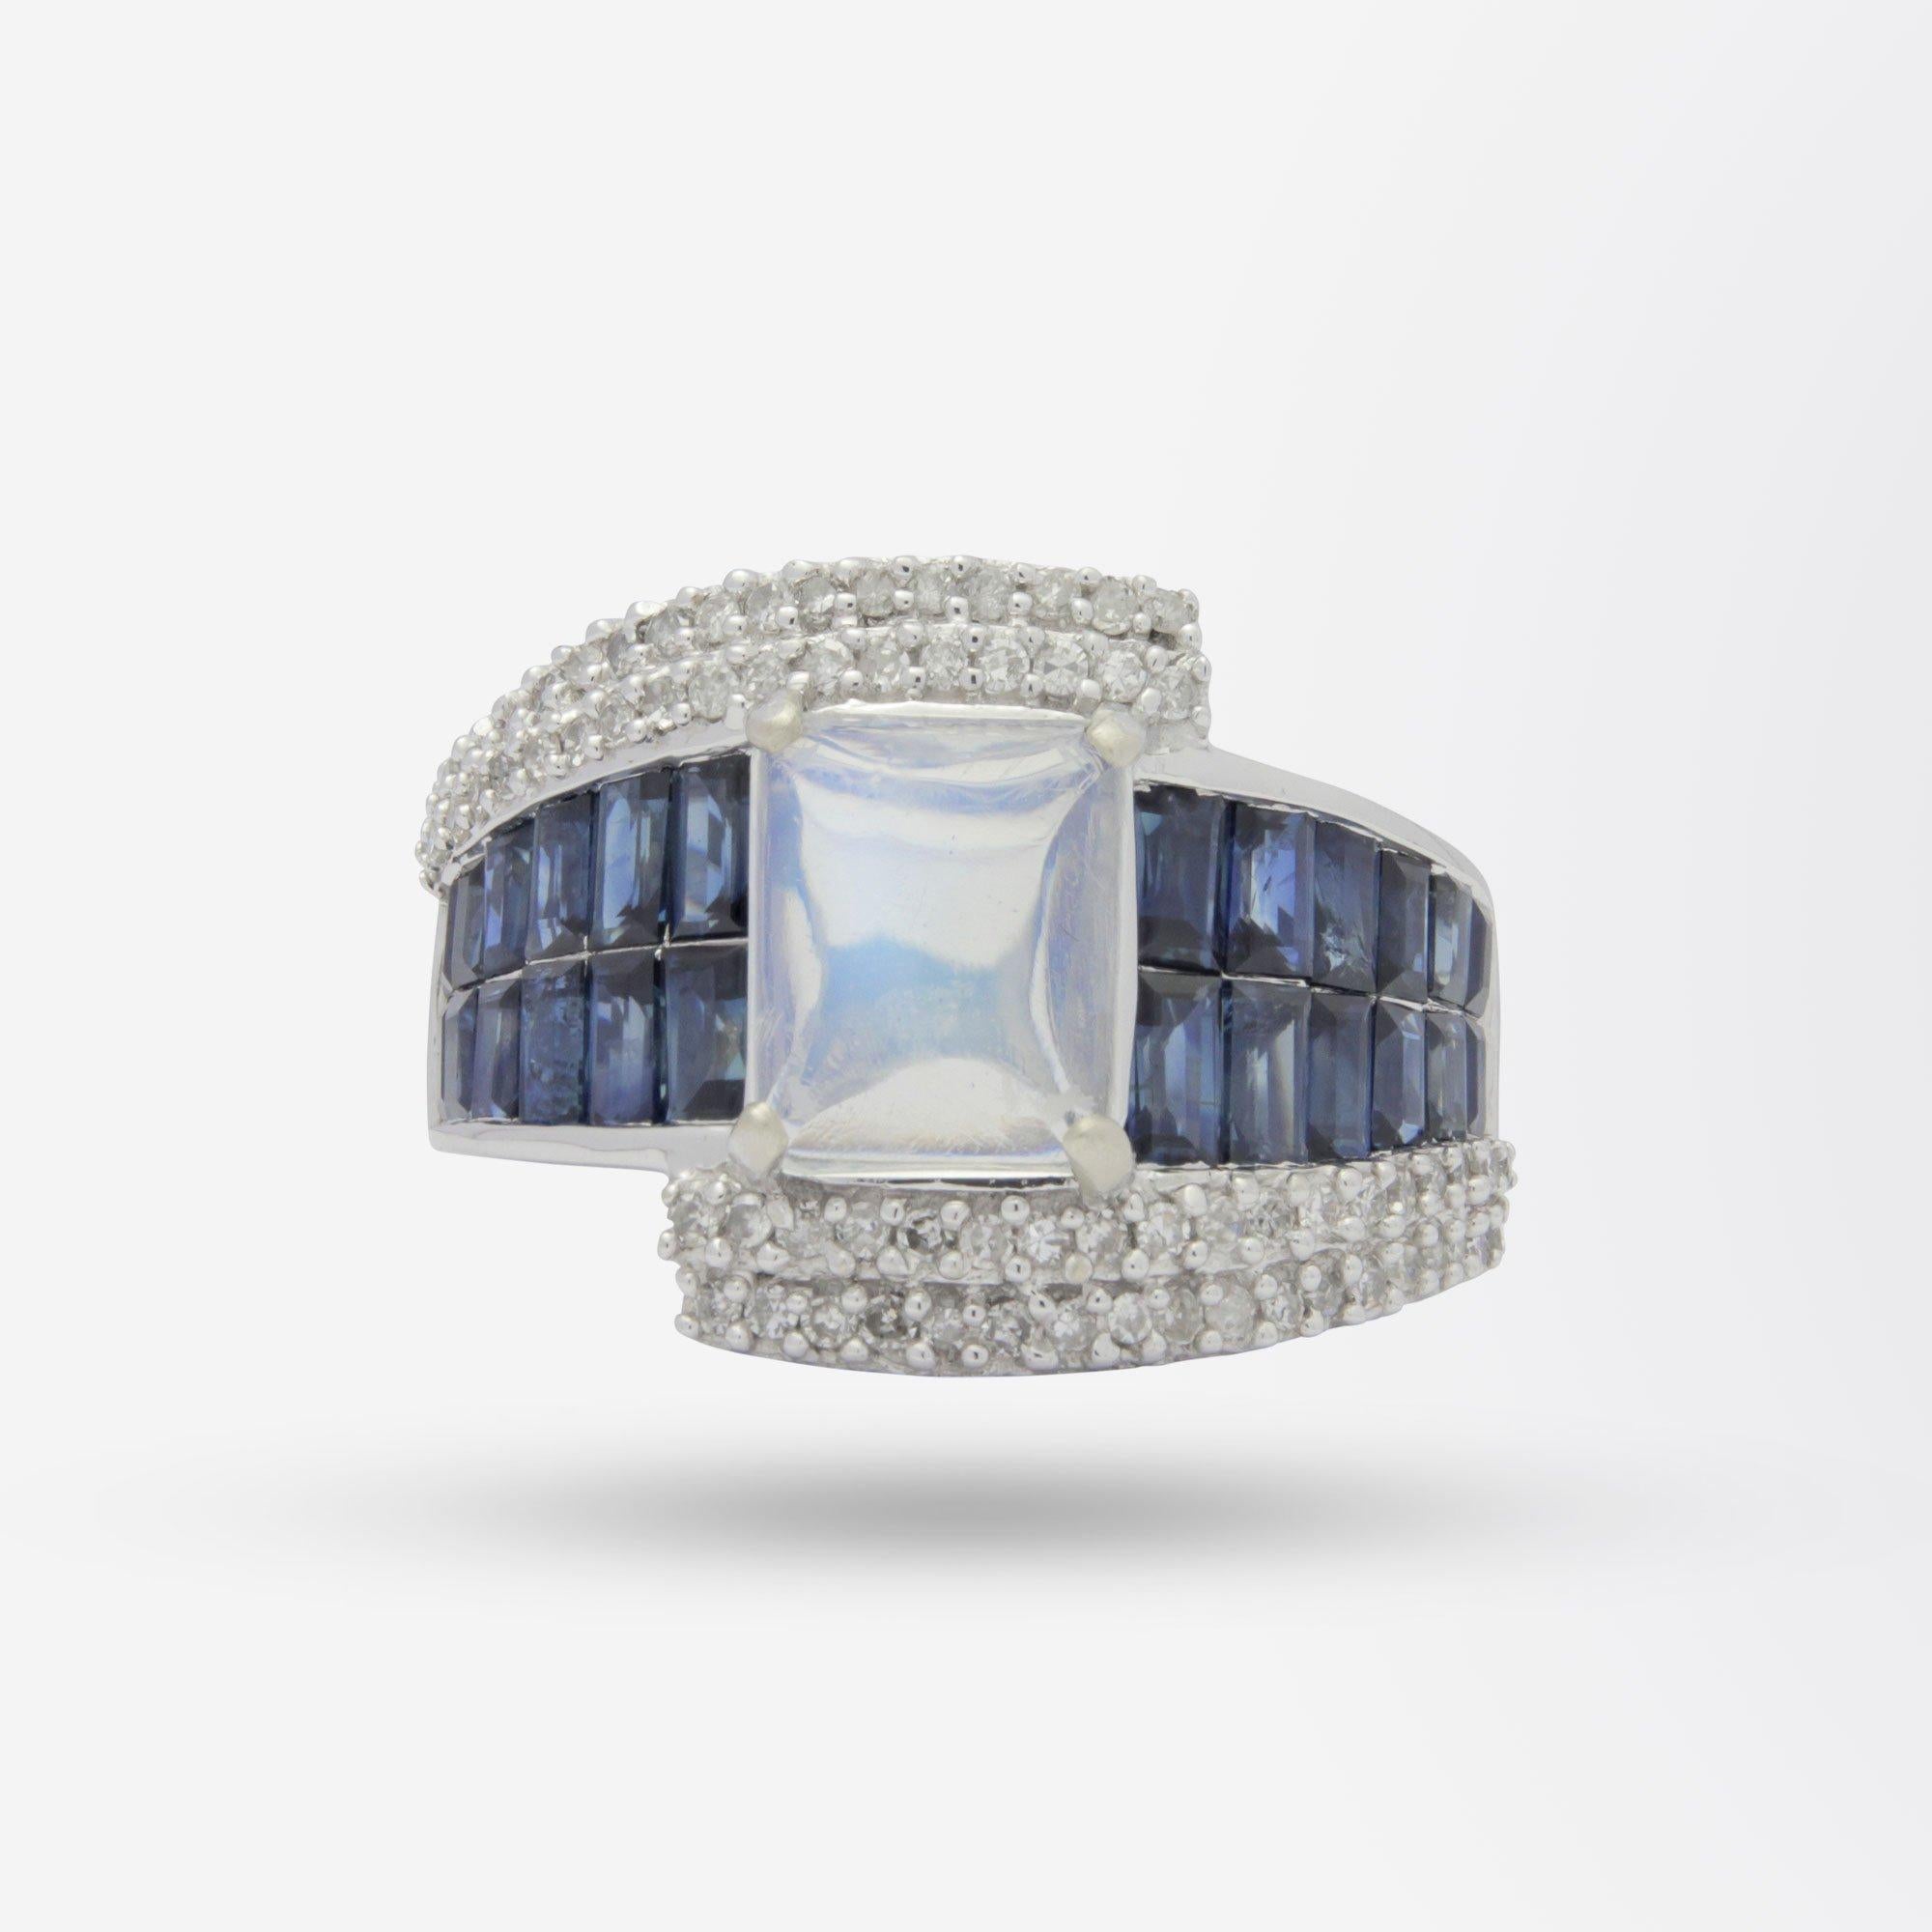 A fine 14 karat white gold ring set with a central moonstone and flanked with sapphires and diamonds. The cocktail ring features 93 stones in total and is asymmetric in design centring on a rectangular cabochon cut moonstone. The shoulders of the